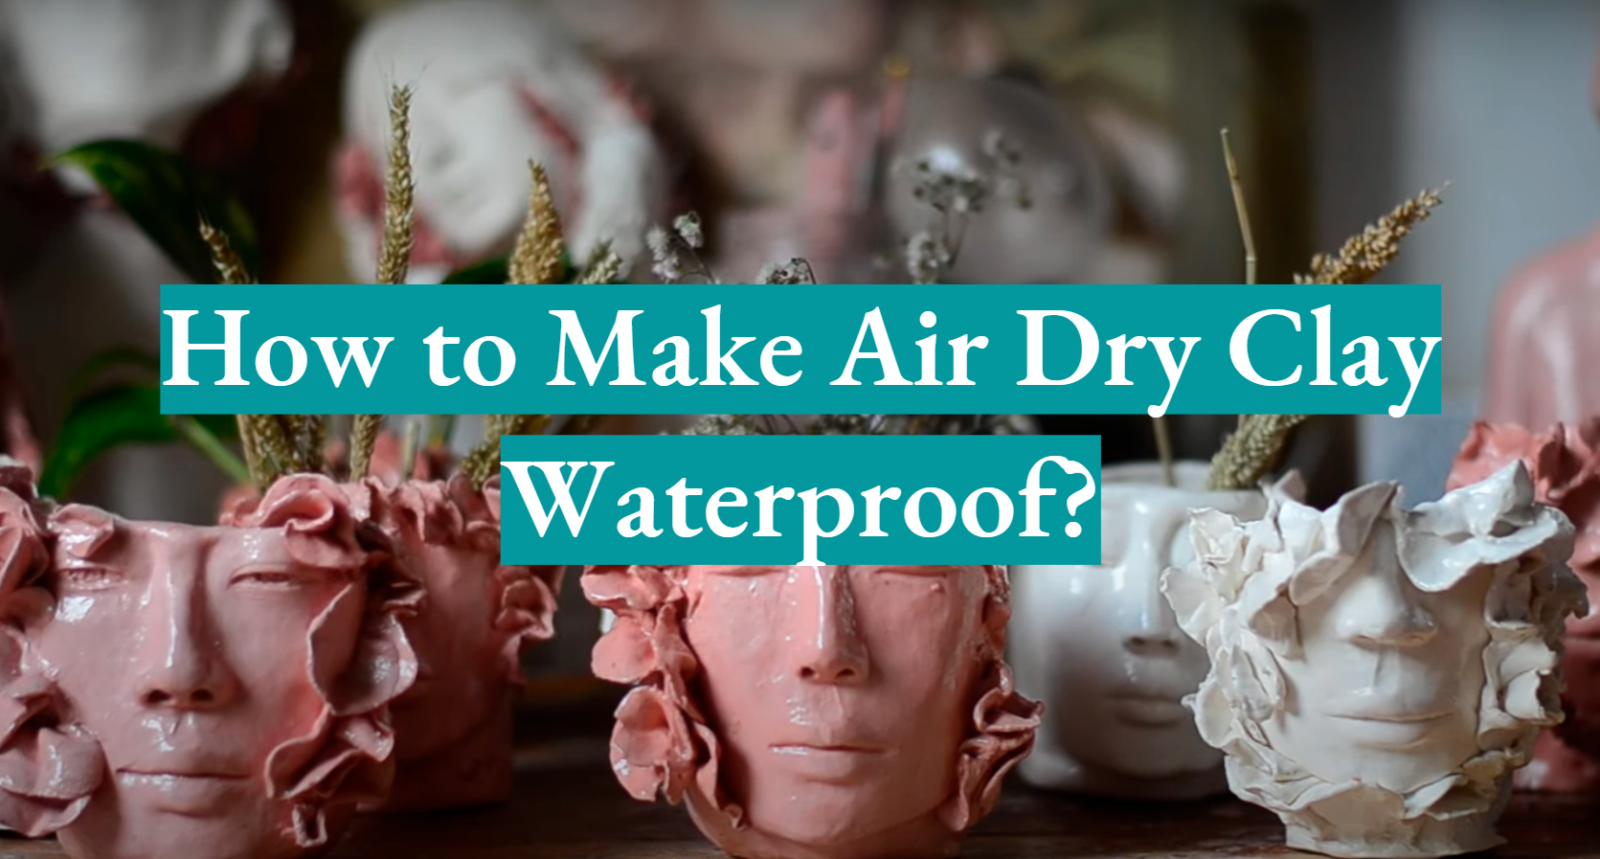 How to Make Air Dry Clay Waterproof?